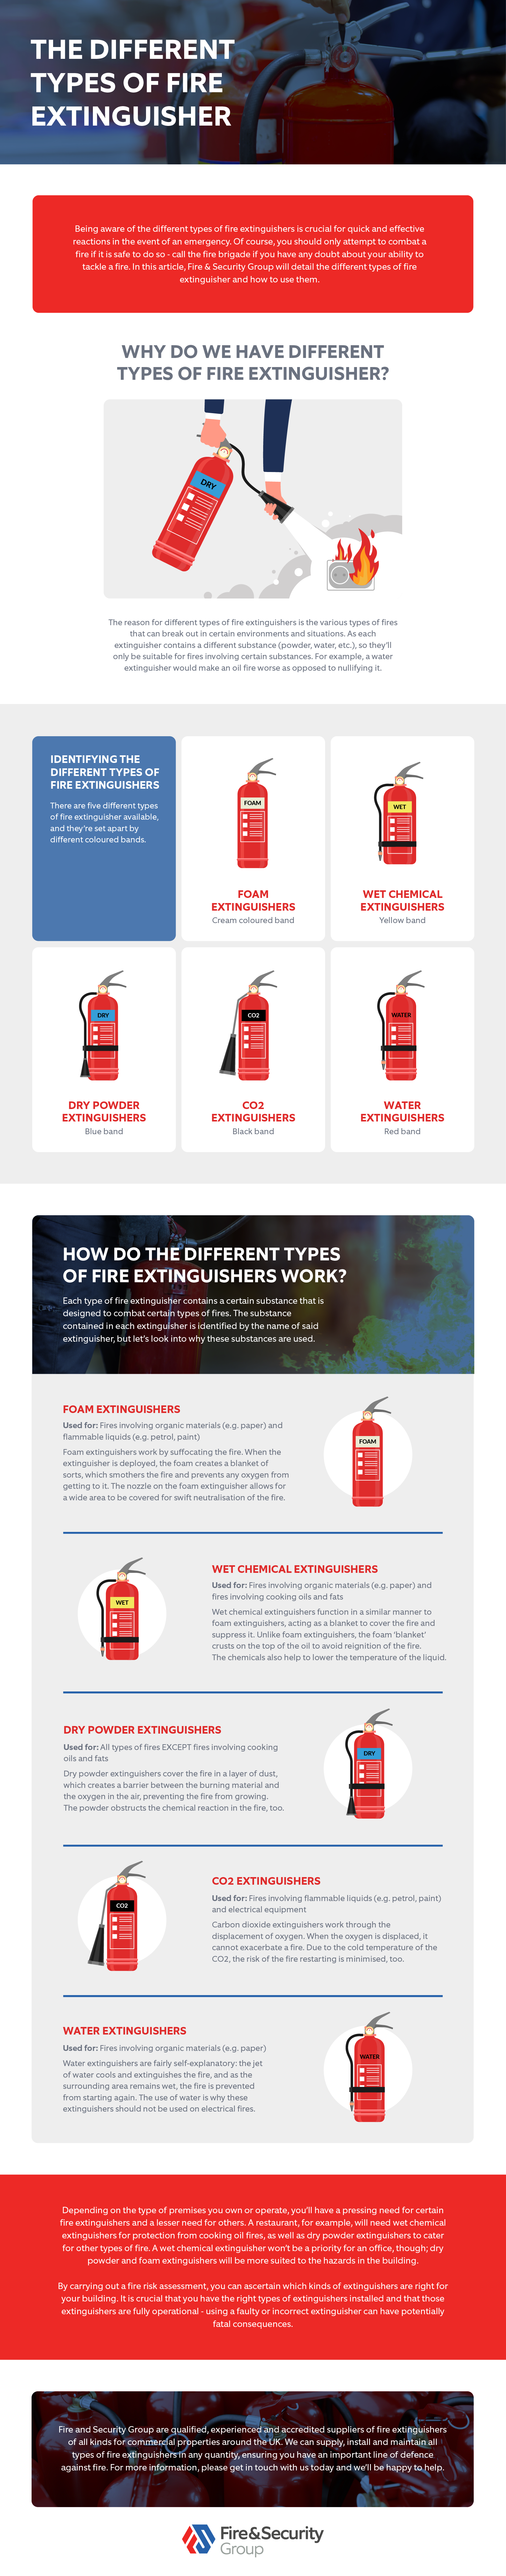 Fire-&-Security-Group_The-different-types-of-fire-extinguishers_Infographic